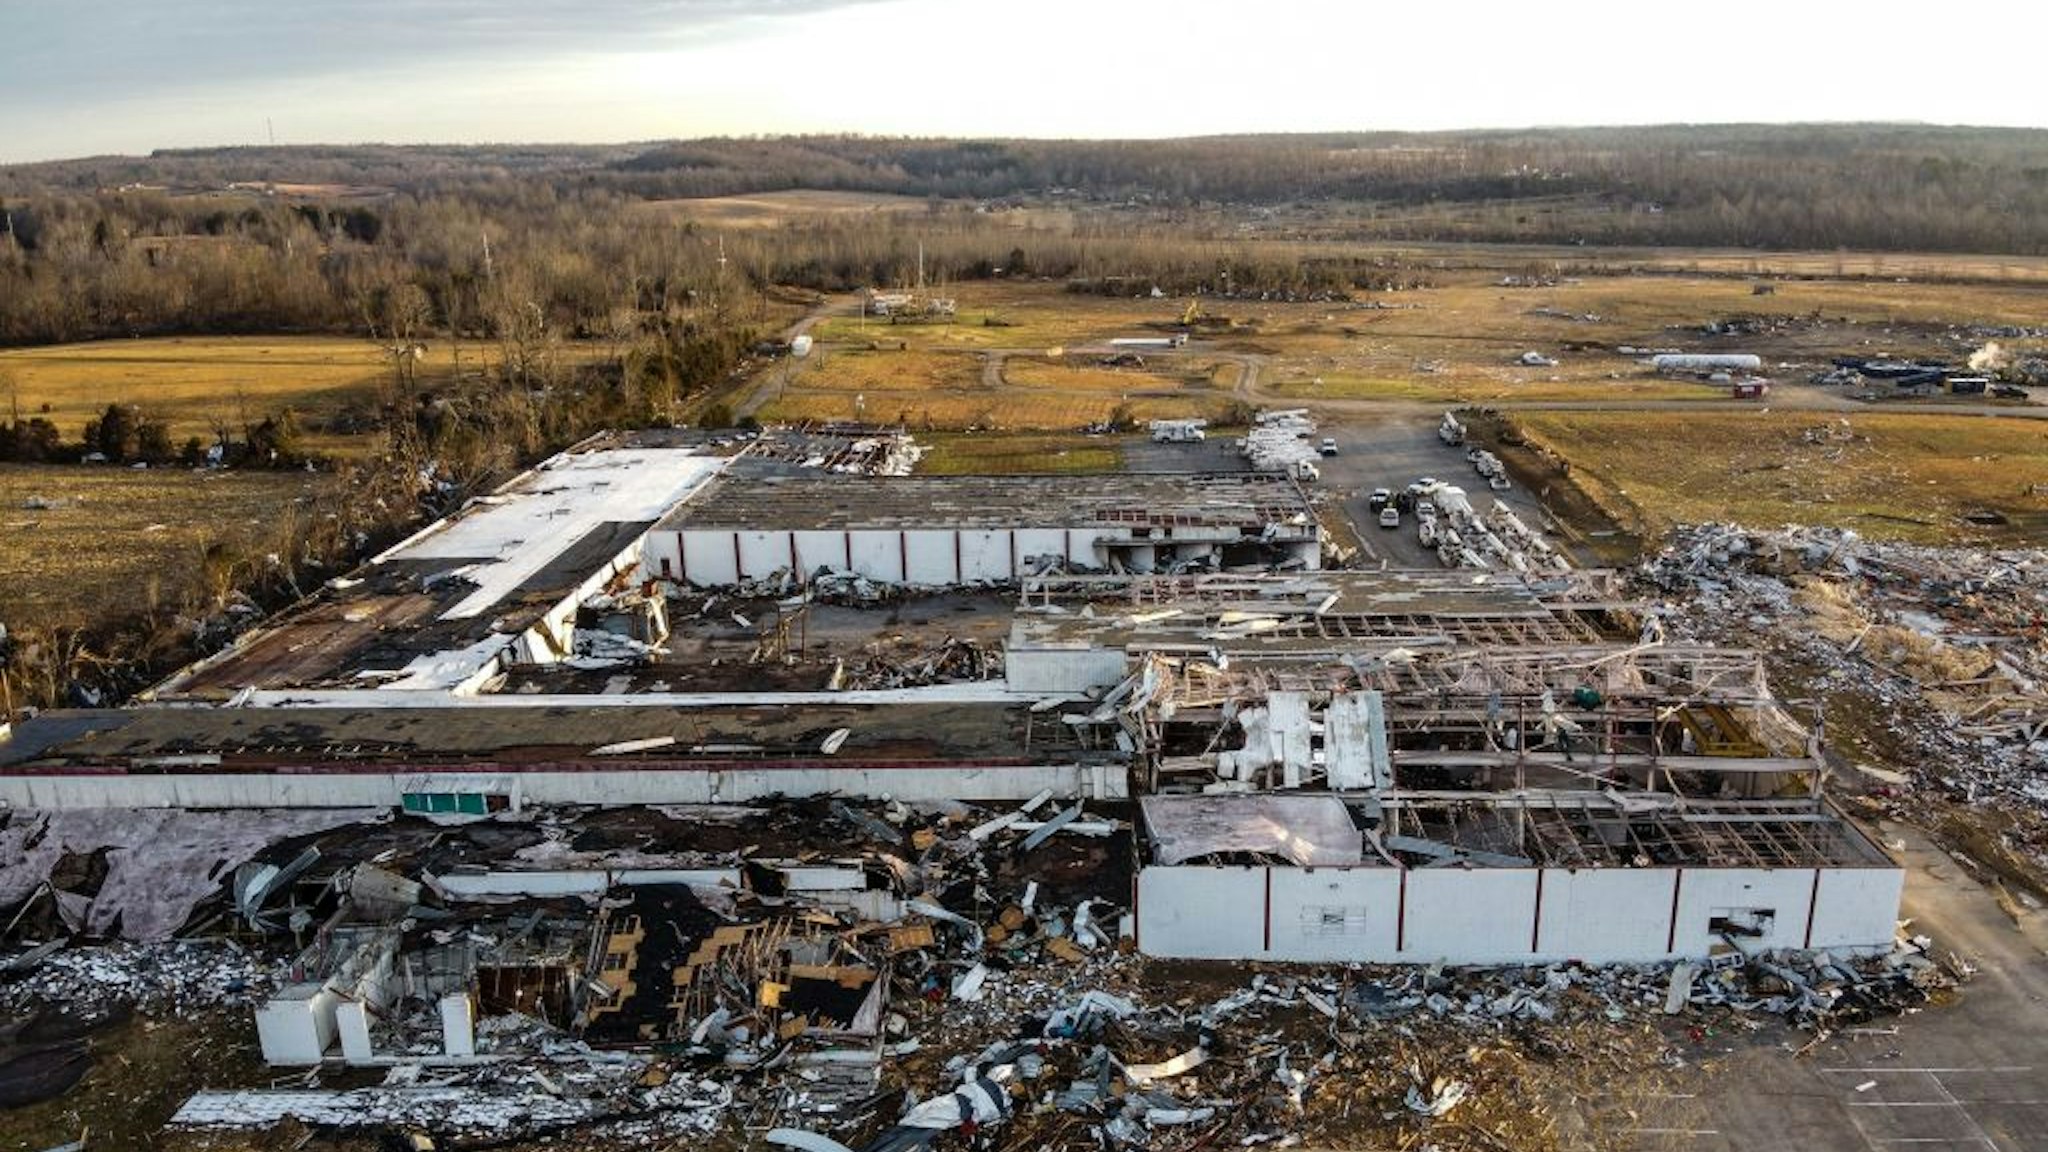 An aerial view of a business in Dawson Springs, Kentucky, on December 14, 2021, four days after tornadoes hit the area. - Kentucky officials voiced relief December 13 that dozens of workers at a candle factory appear to have survived tornadoes that killed at least 88 people and left a trail of devastation across six US states.